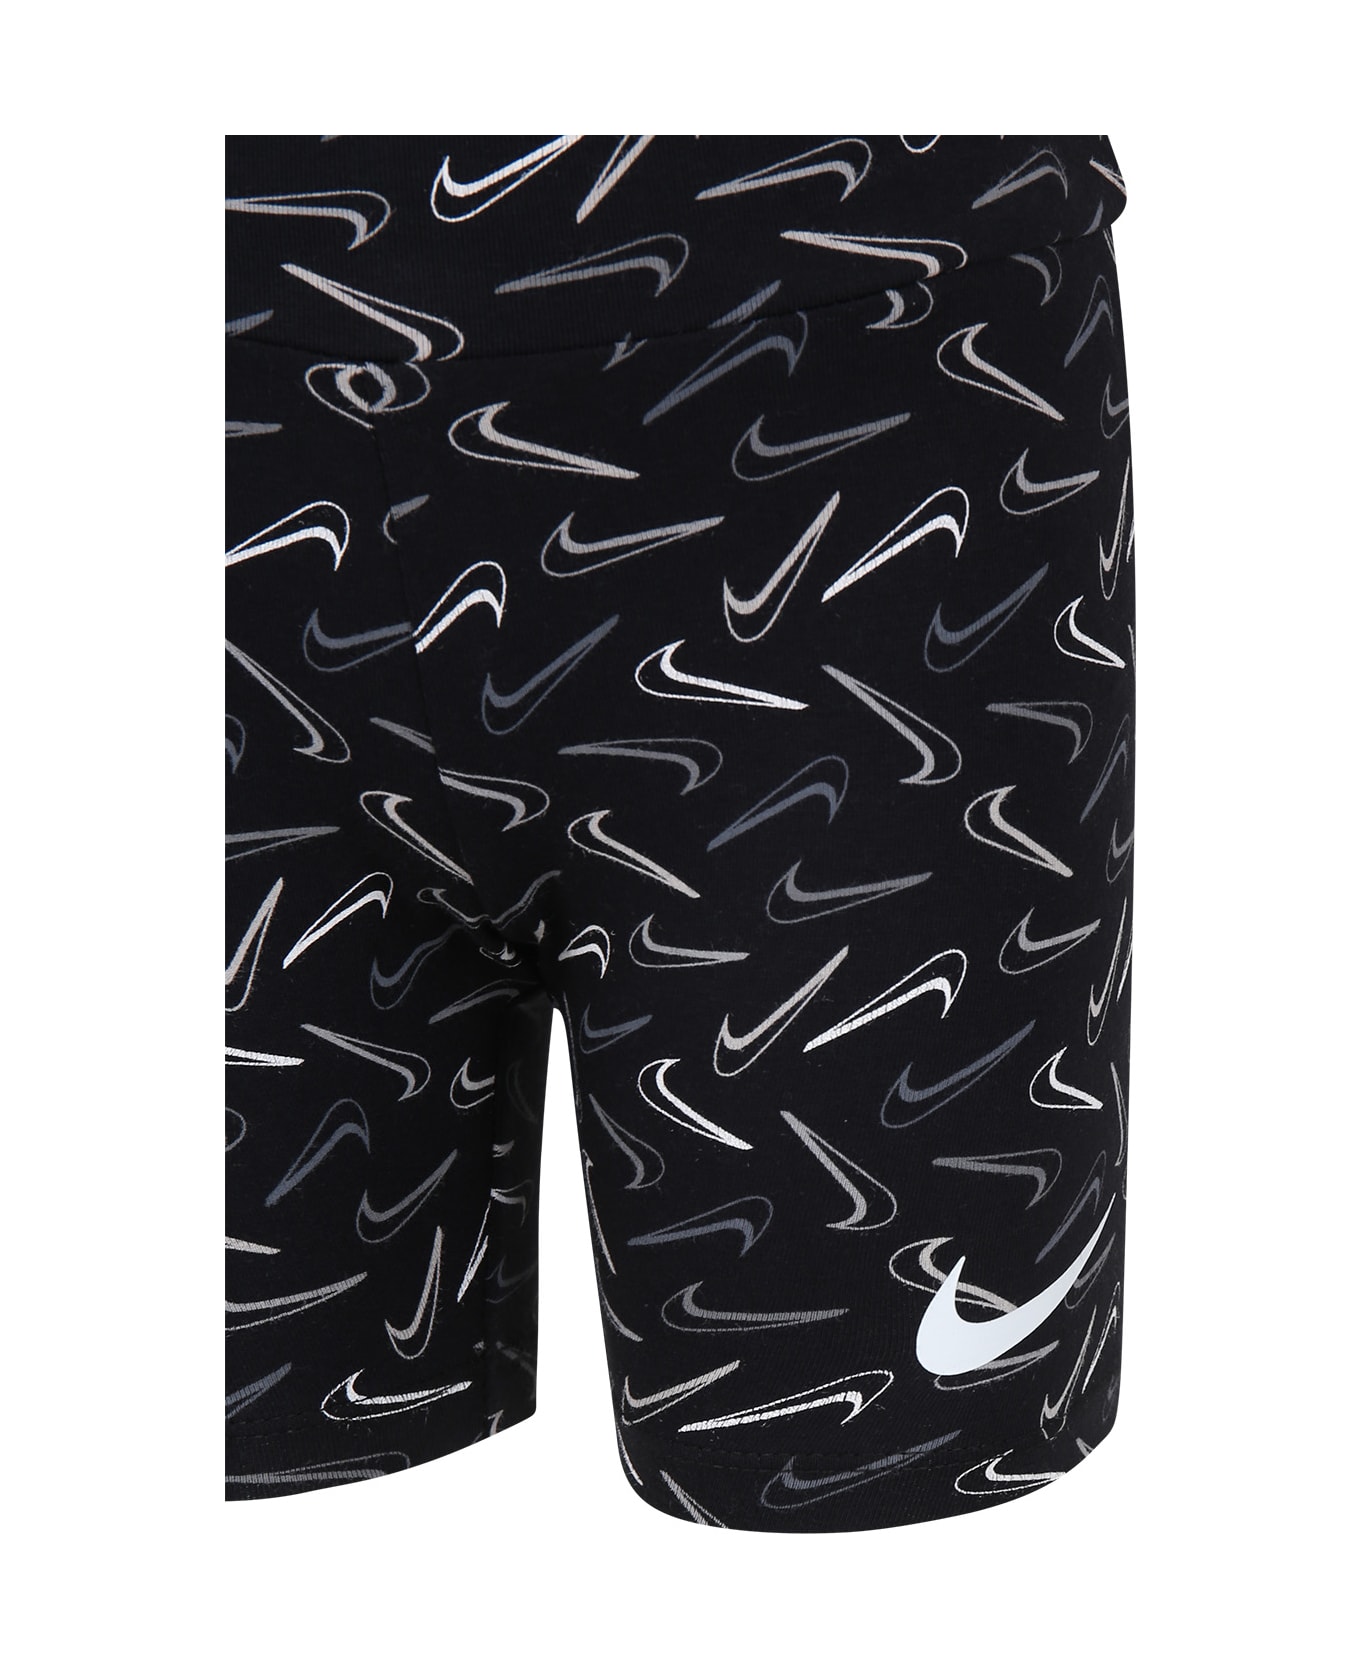 Nike Black Shorts For Girl With Swoosh - Black